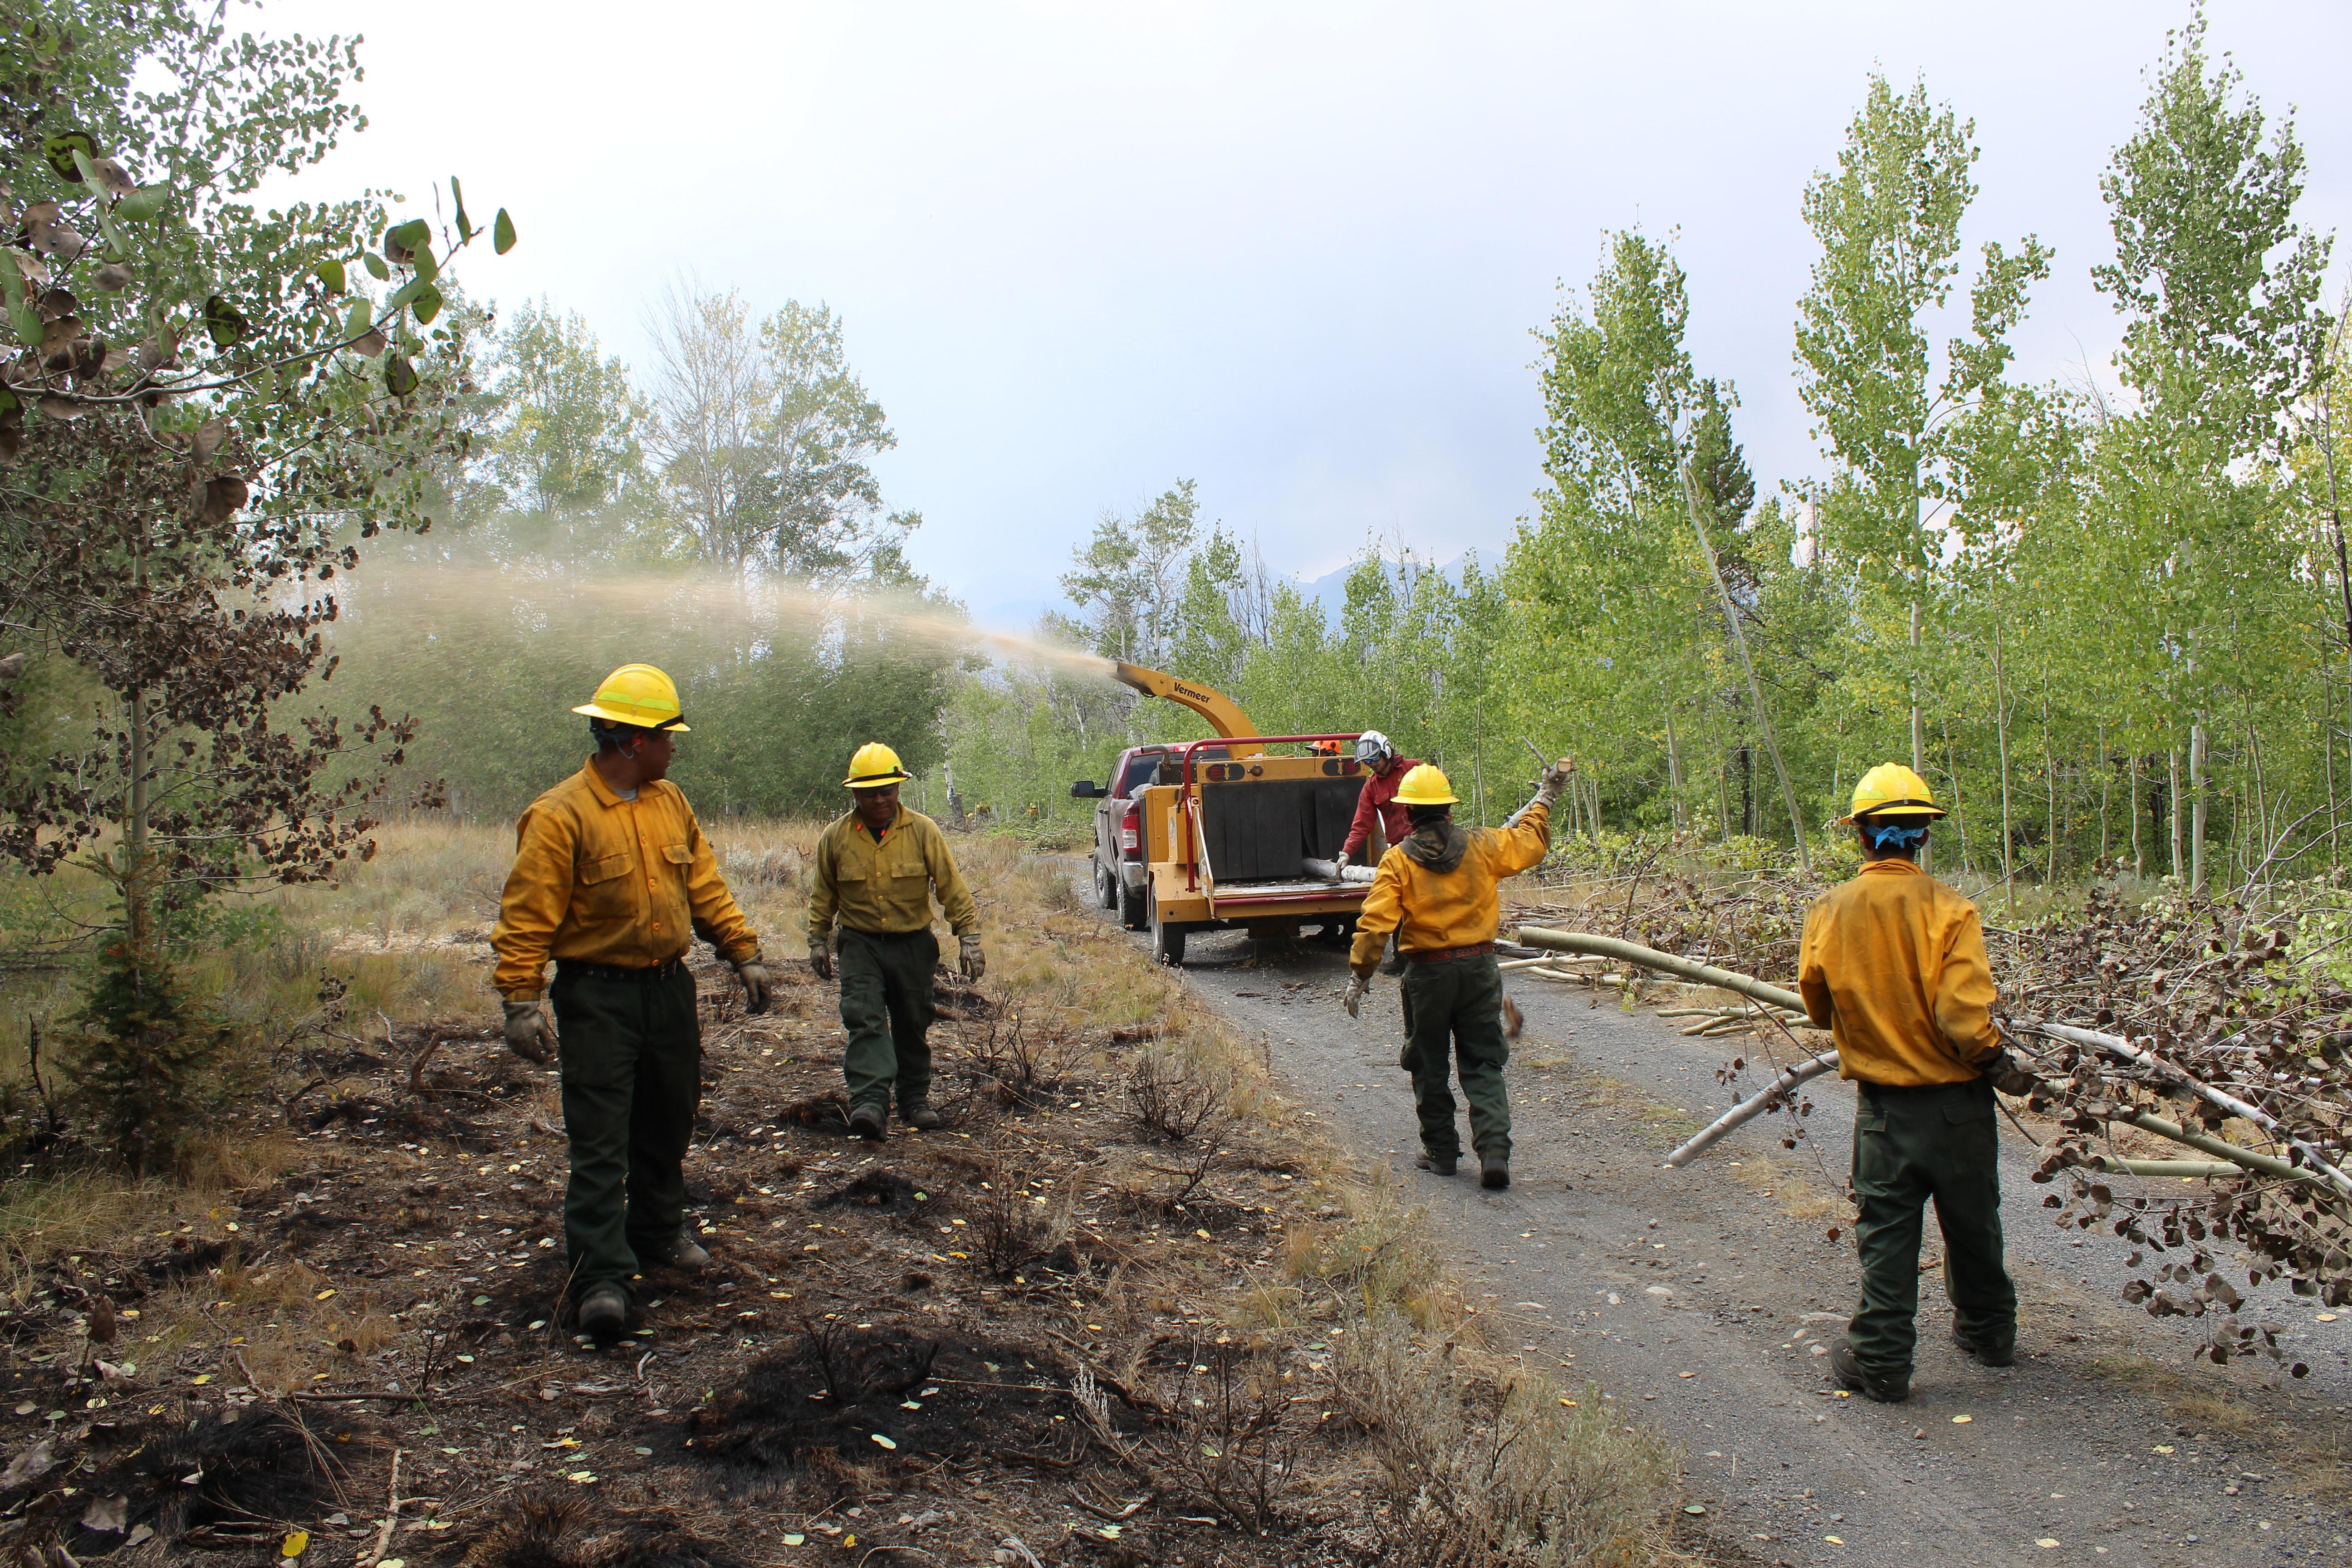 chipping crew works on east side of fire